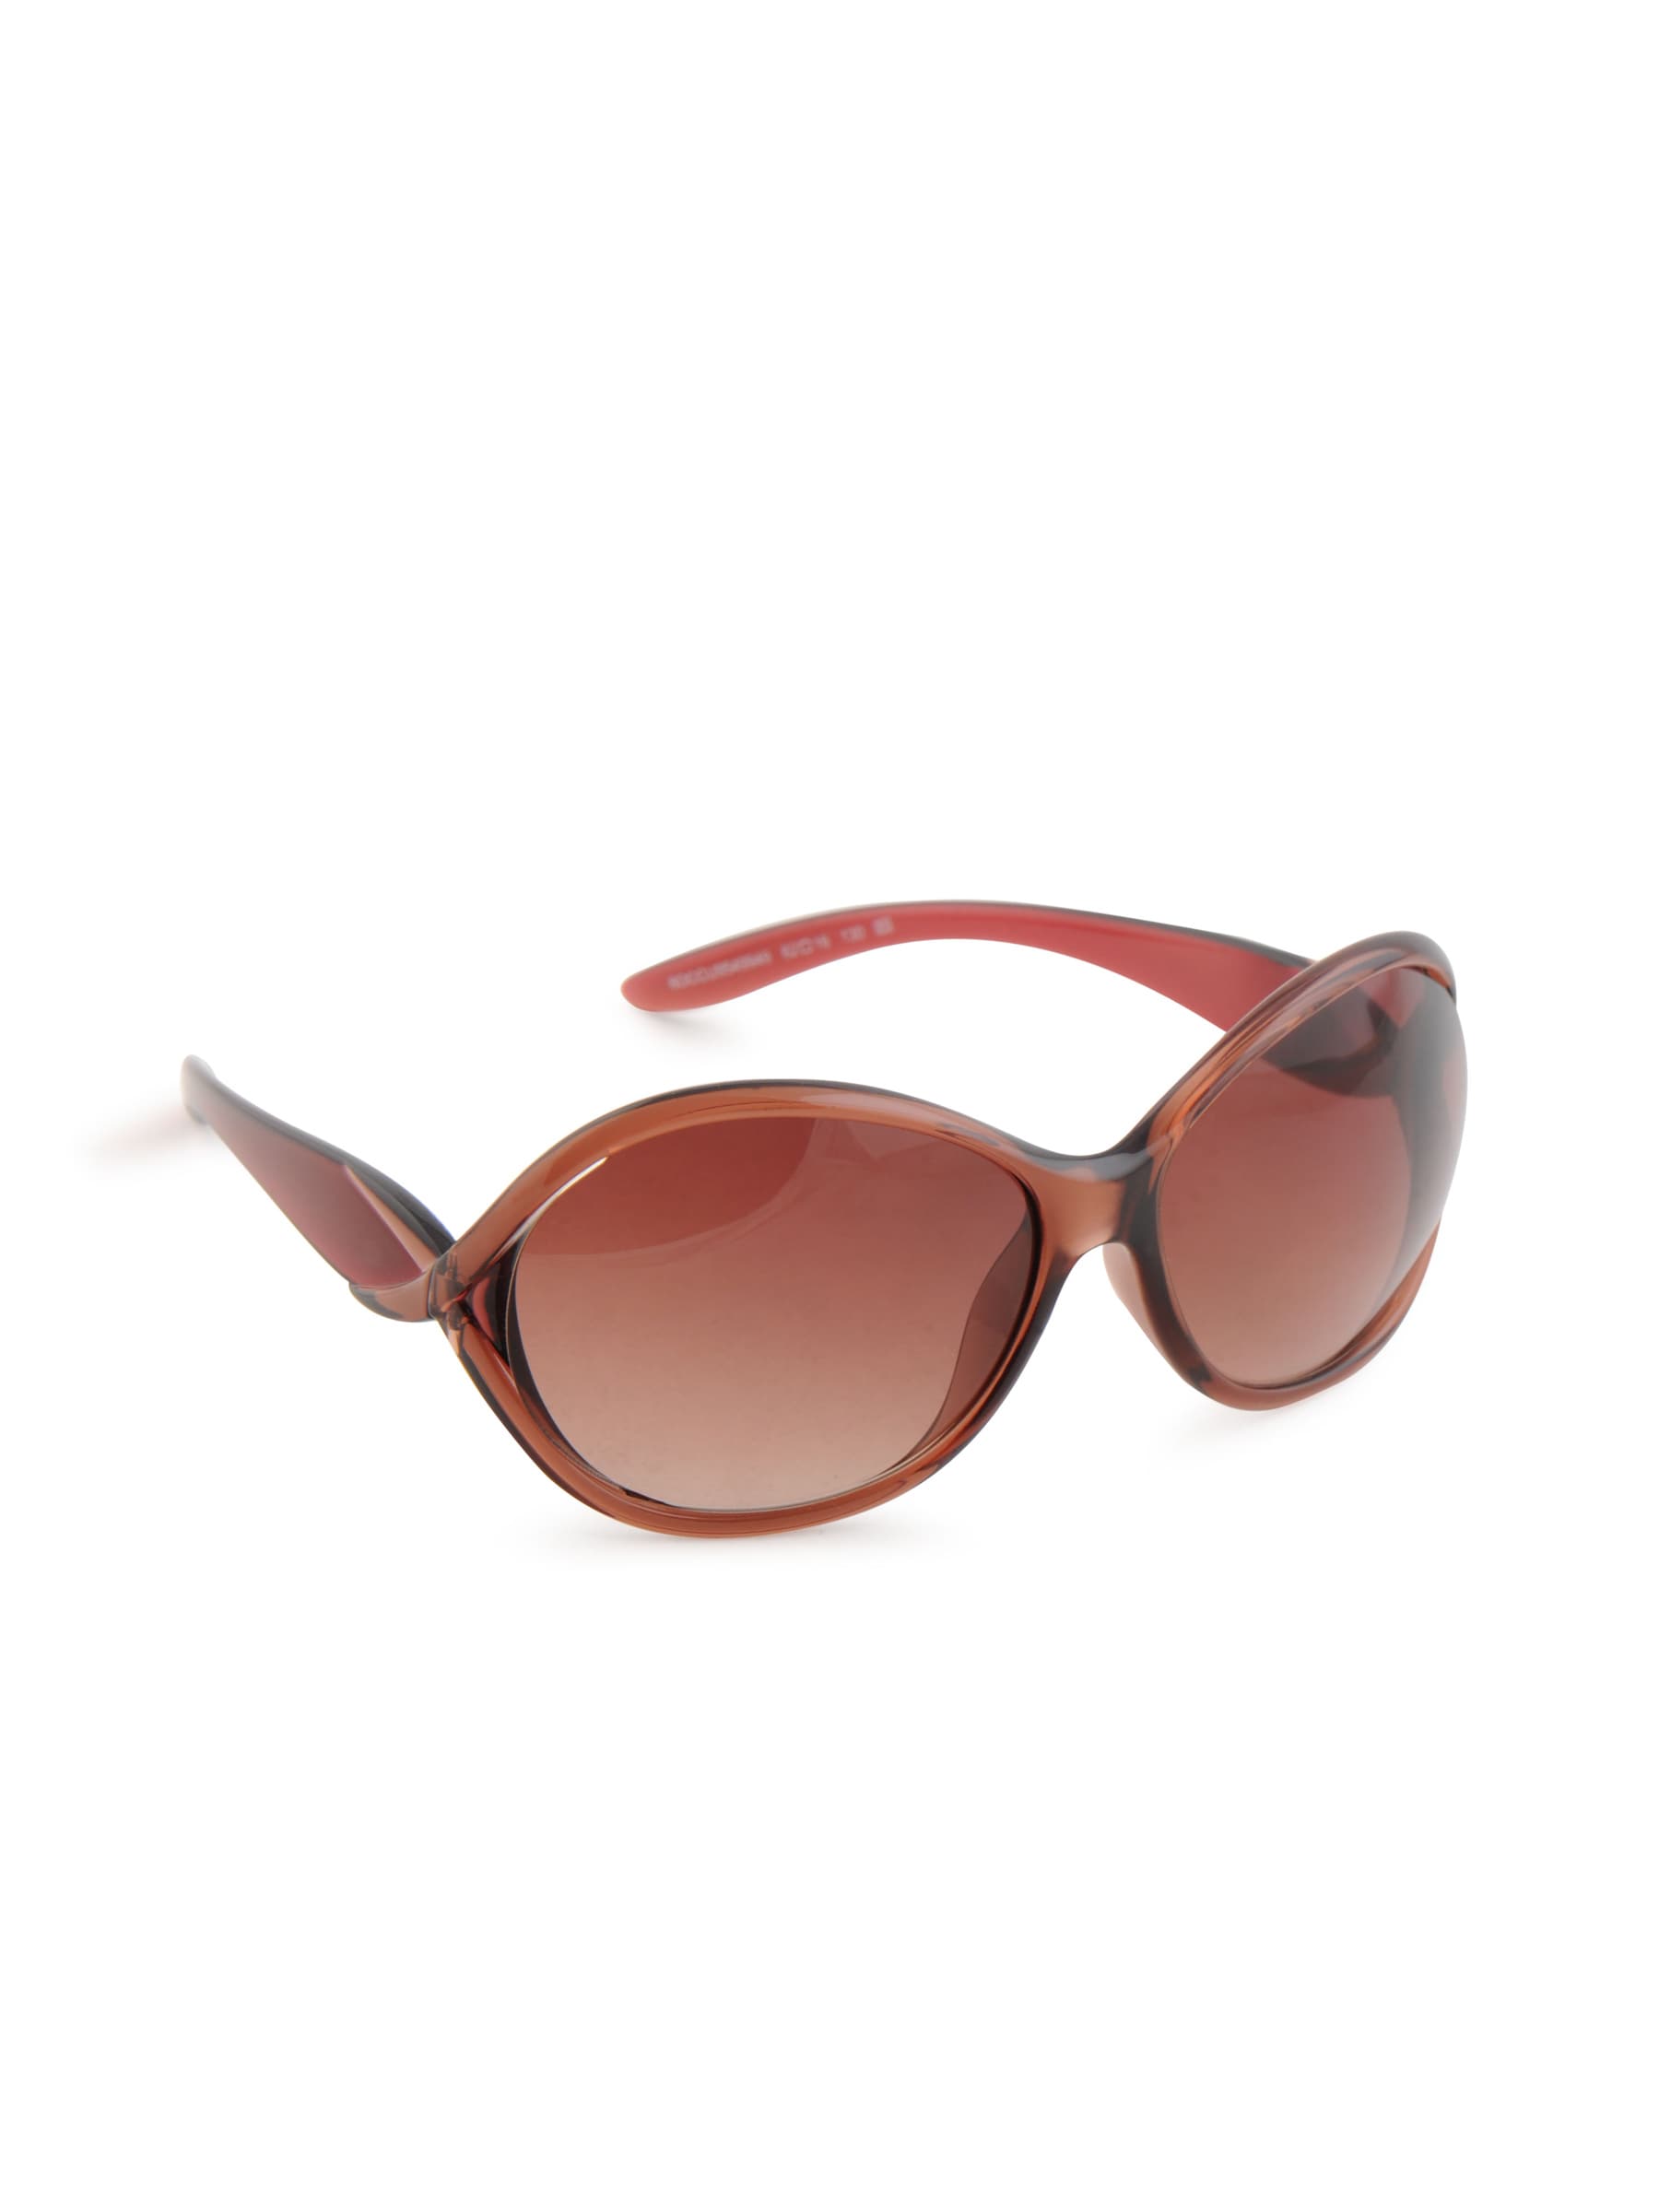 United Colors of Benetton Women Casual Brown Sunglasses